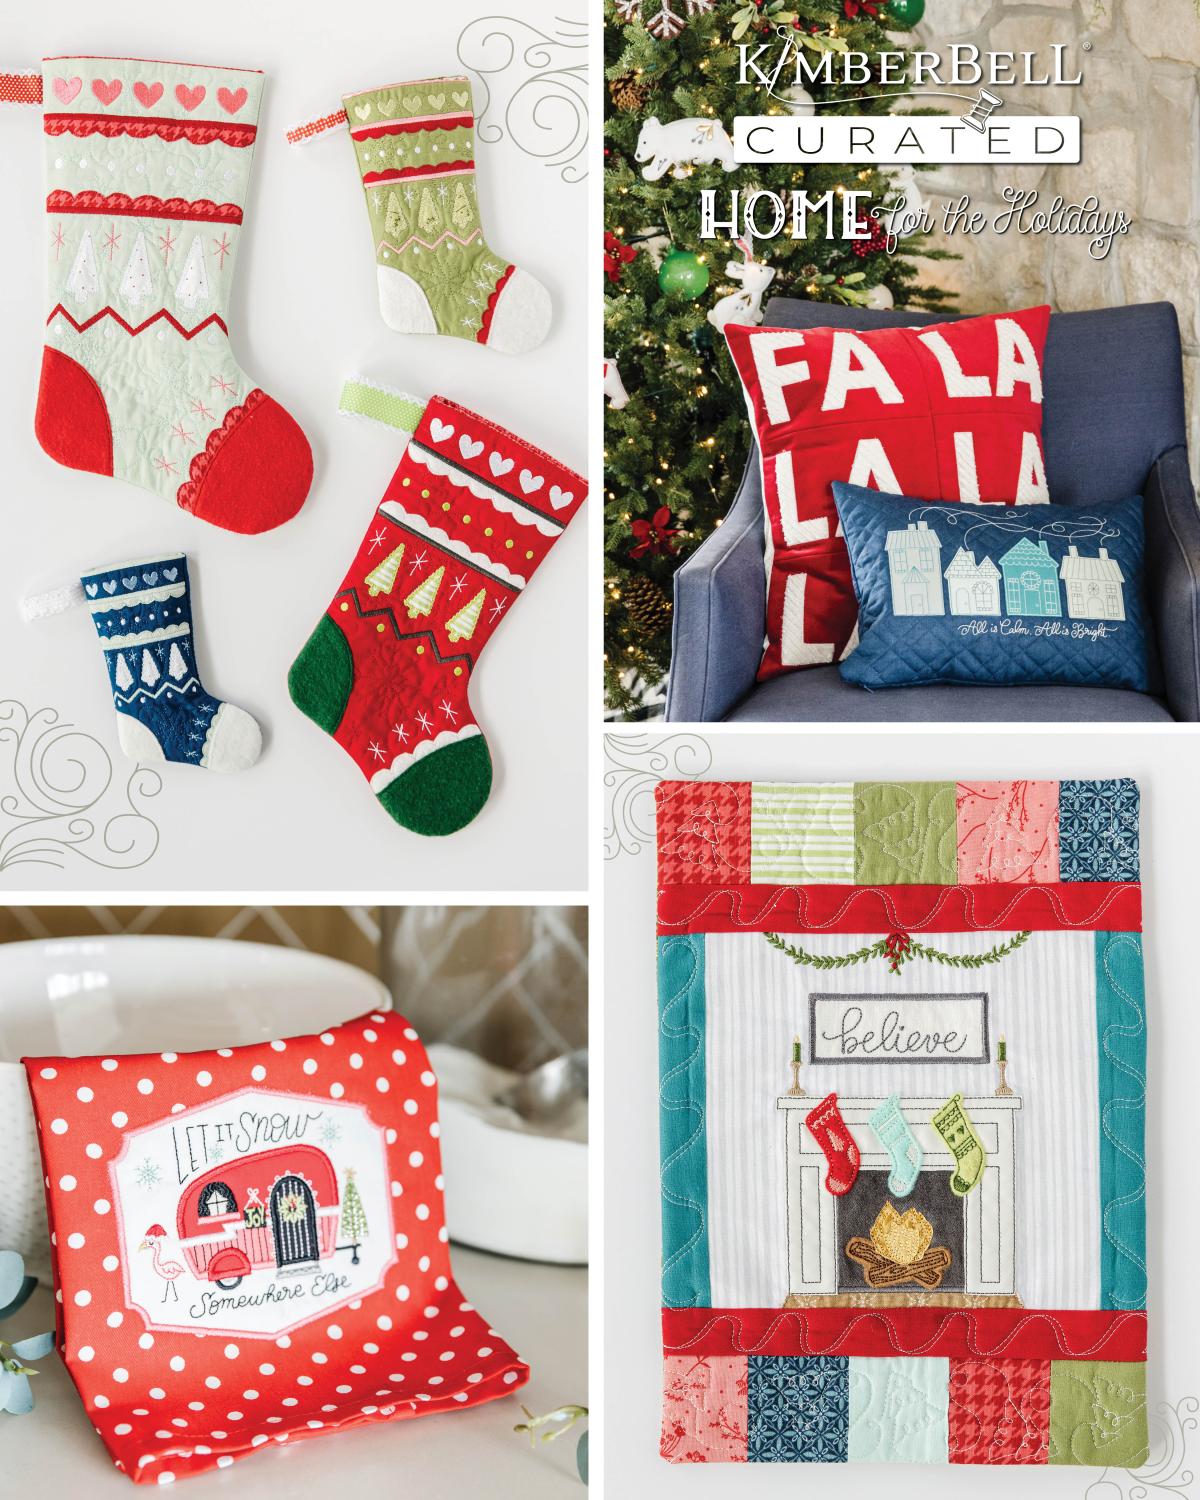 Kimberbell Curated: Home For The Holidays – Creative Stitches